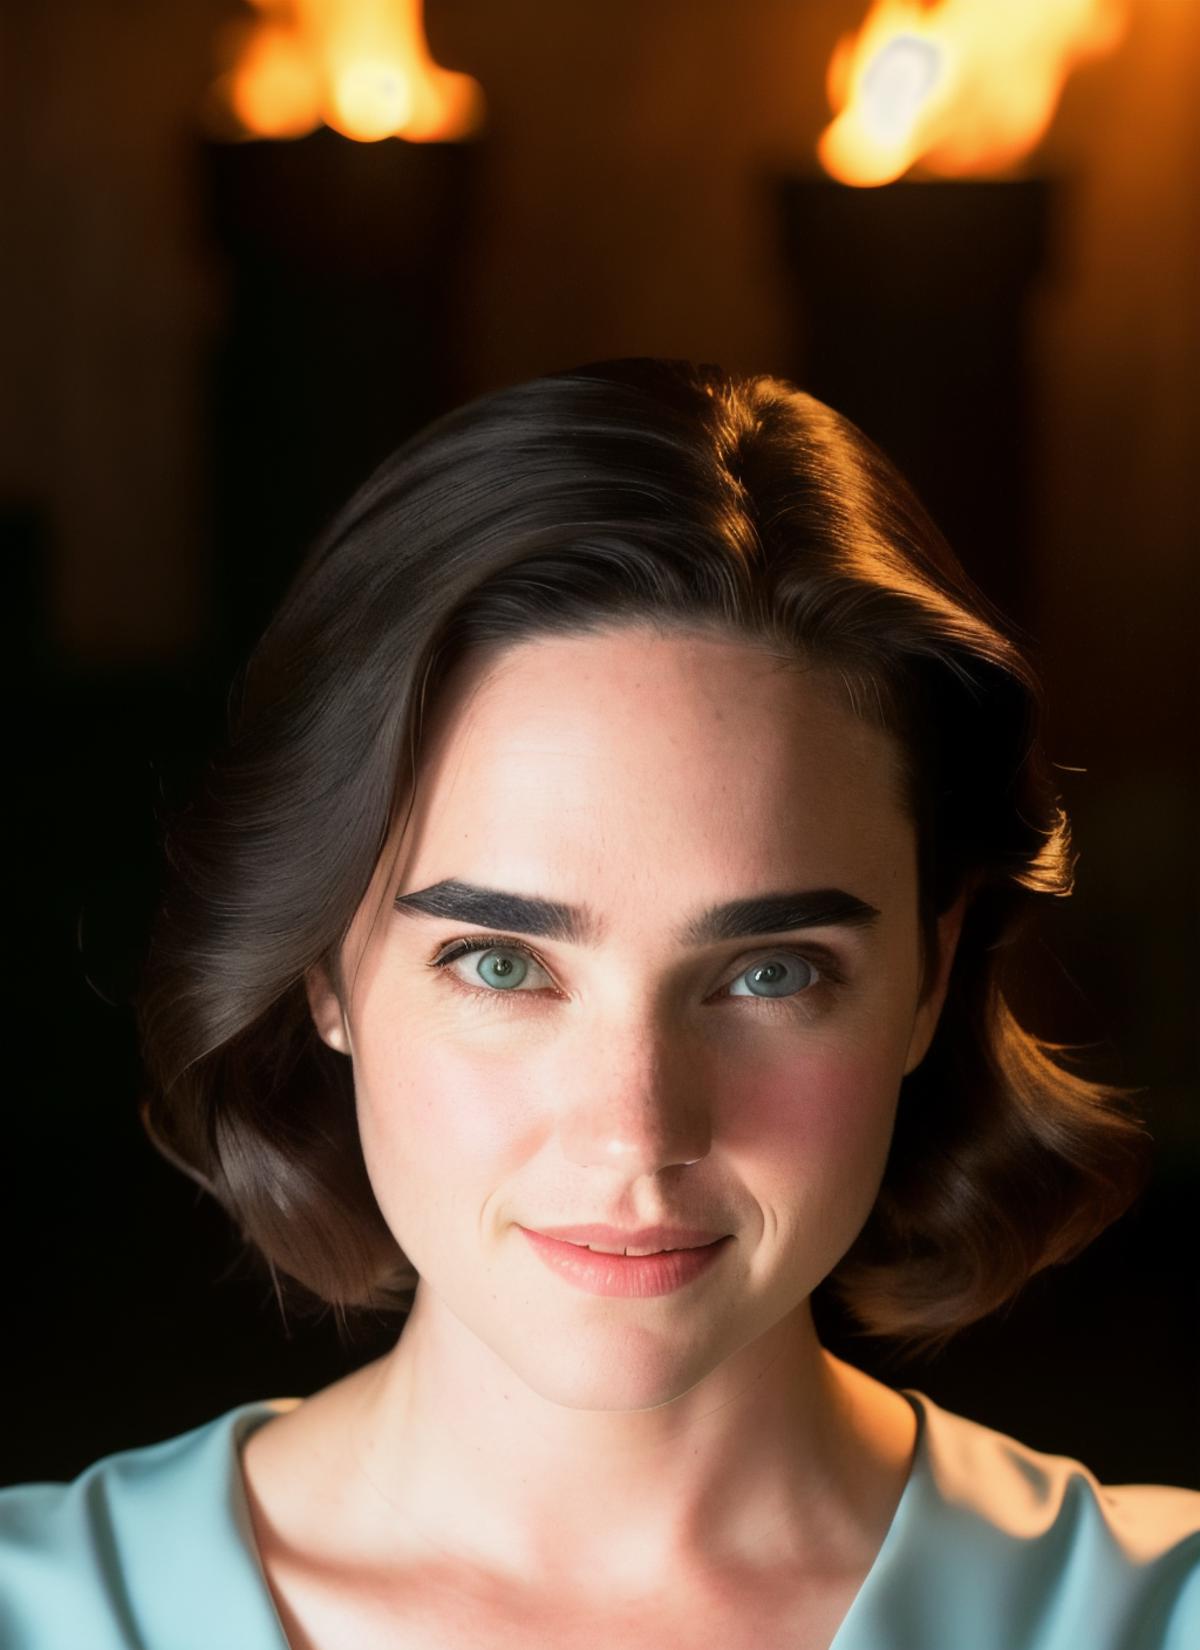 Jennifer Connelly (young years) image by astragartist